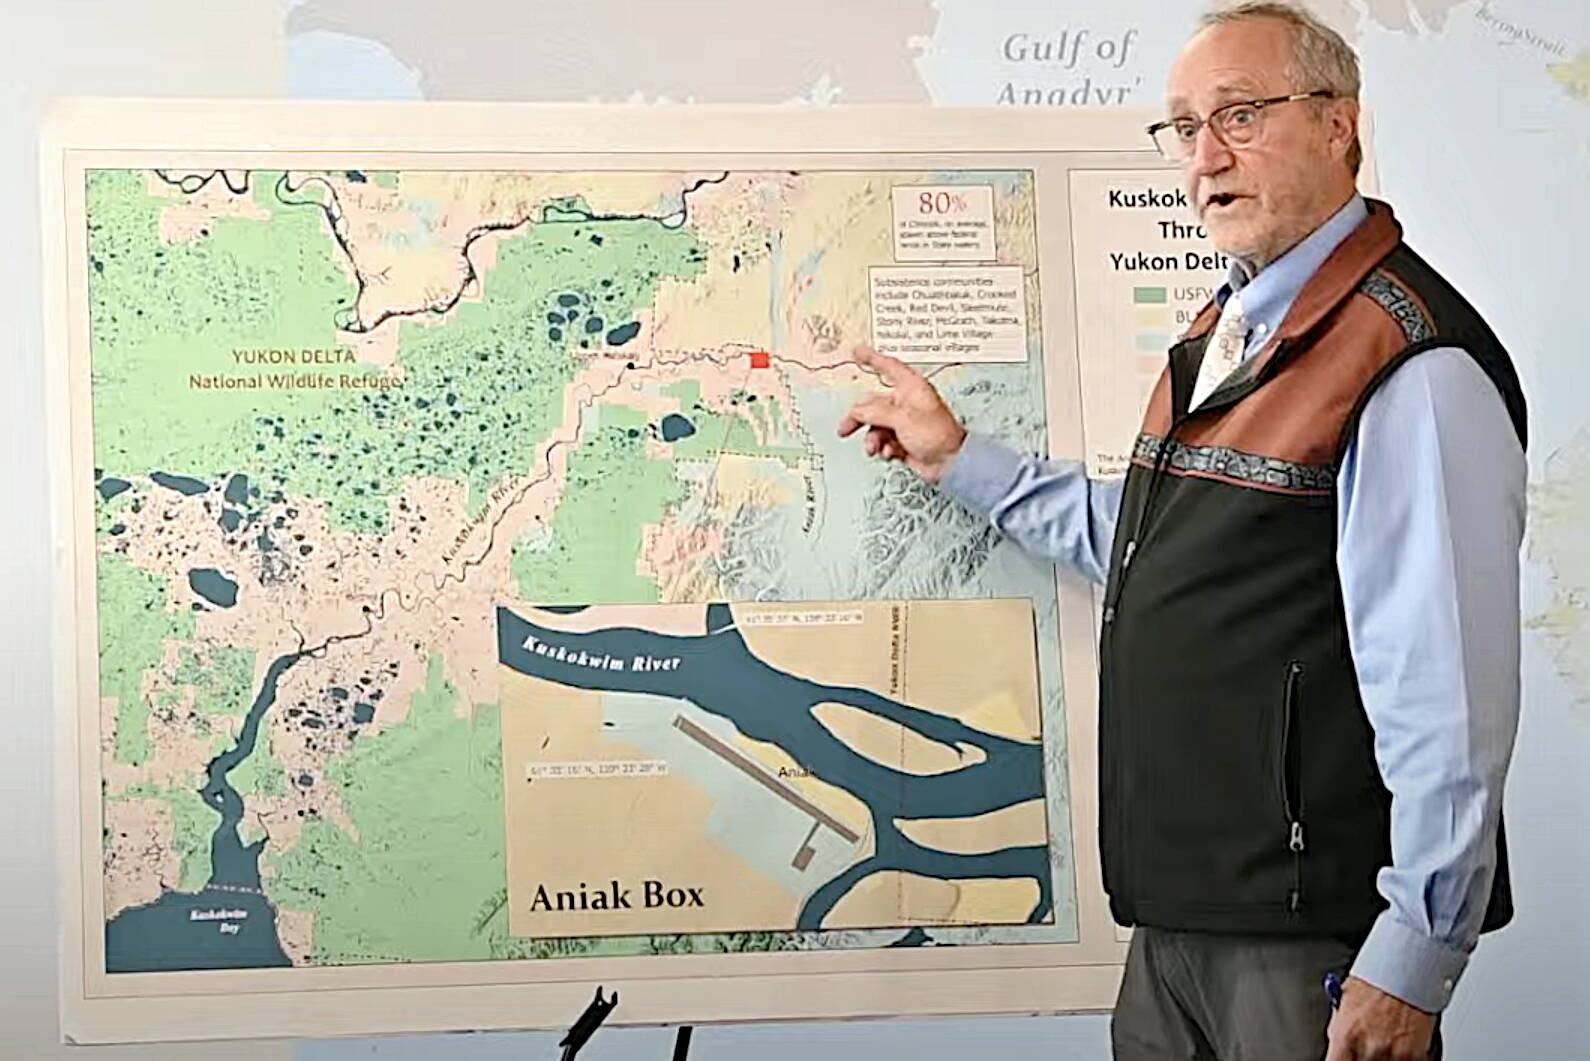 Doug Vincent-Lang, commissioner of the Alaska Department of Fish and Game, explains the state’s position on fisheries management on the Kuskokwim River during a press conference Friday in Anchorage. Gov. Mike Dunleavy announced during the event the state is seeking summary judgment in a lawsuit by the federal government that accuses the state of illegal subsistence management practices. (Screenshot from official video by the Governor of Alaska)